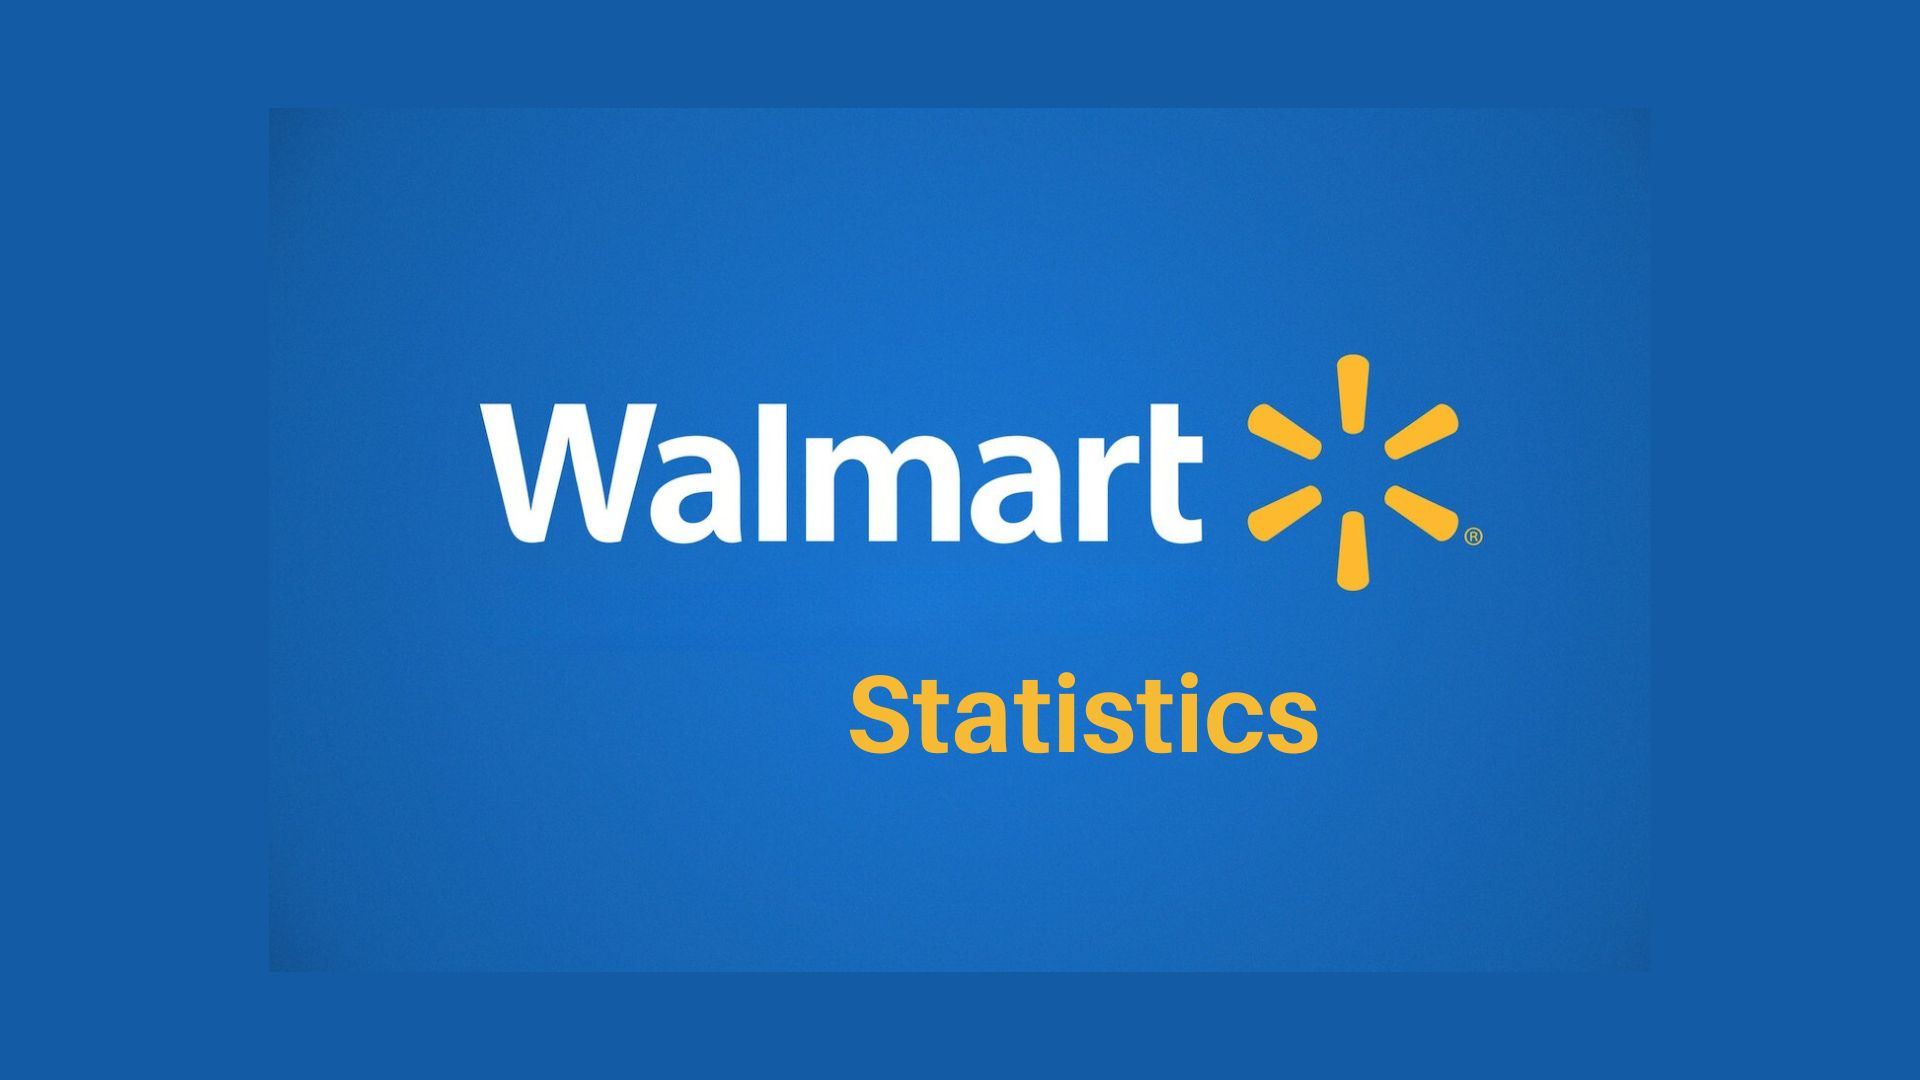 Walmart Statistics 2024 By Market Share, Revenue, Online Purchase Frequency, Total Number of Stores and Walmart+ Subscribers